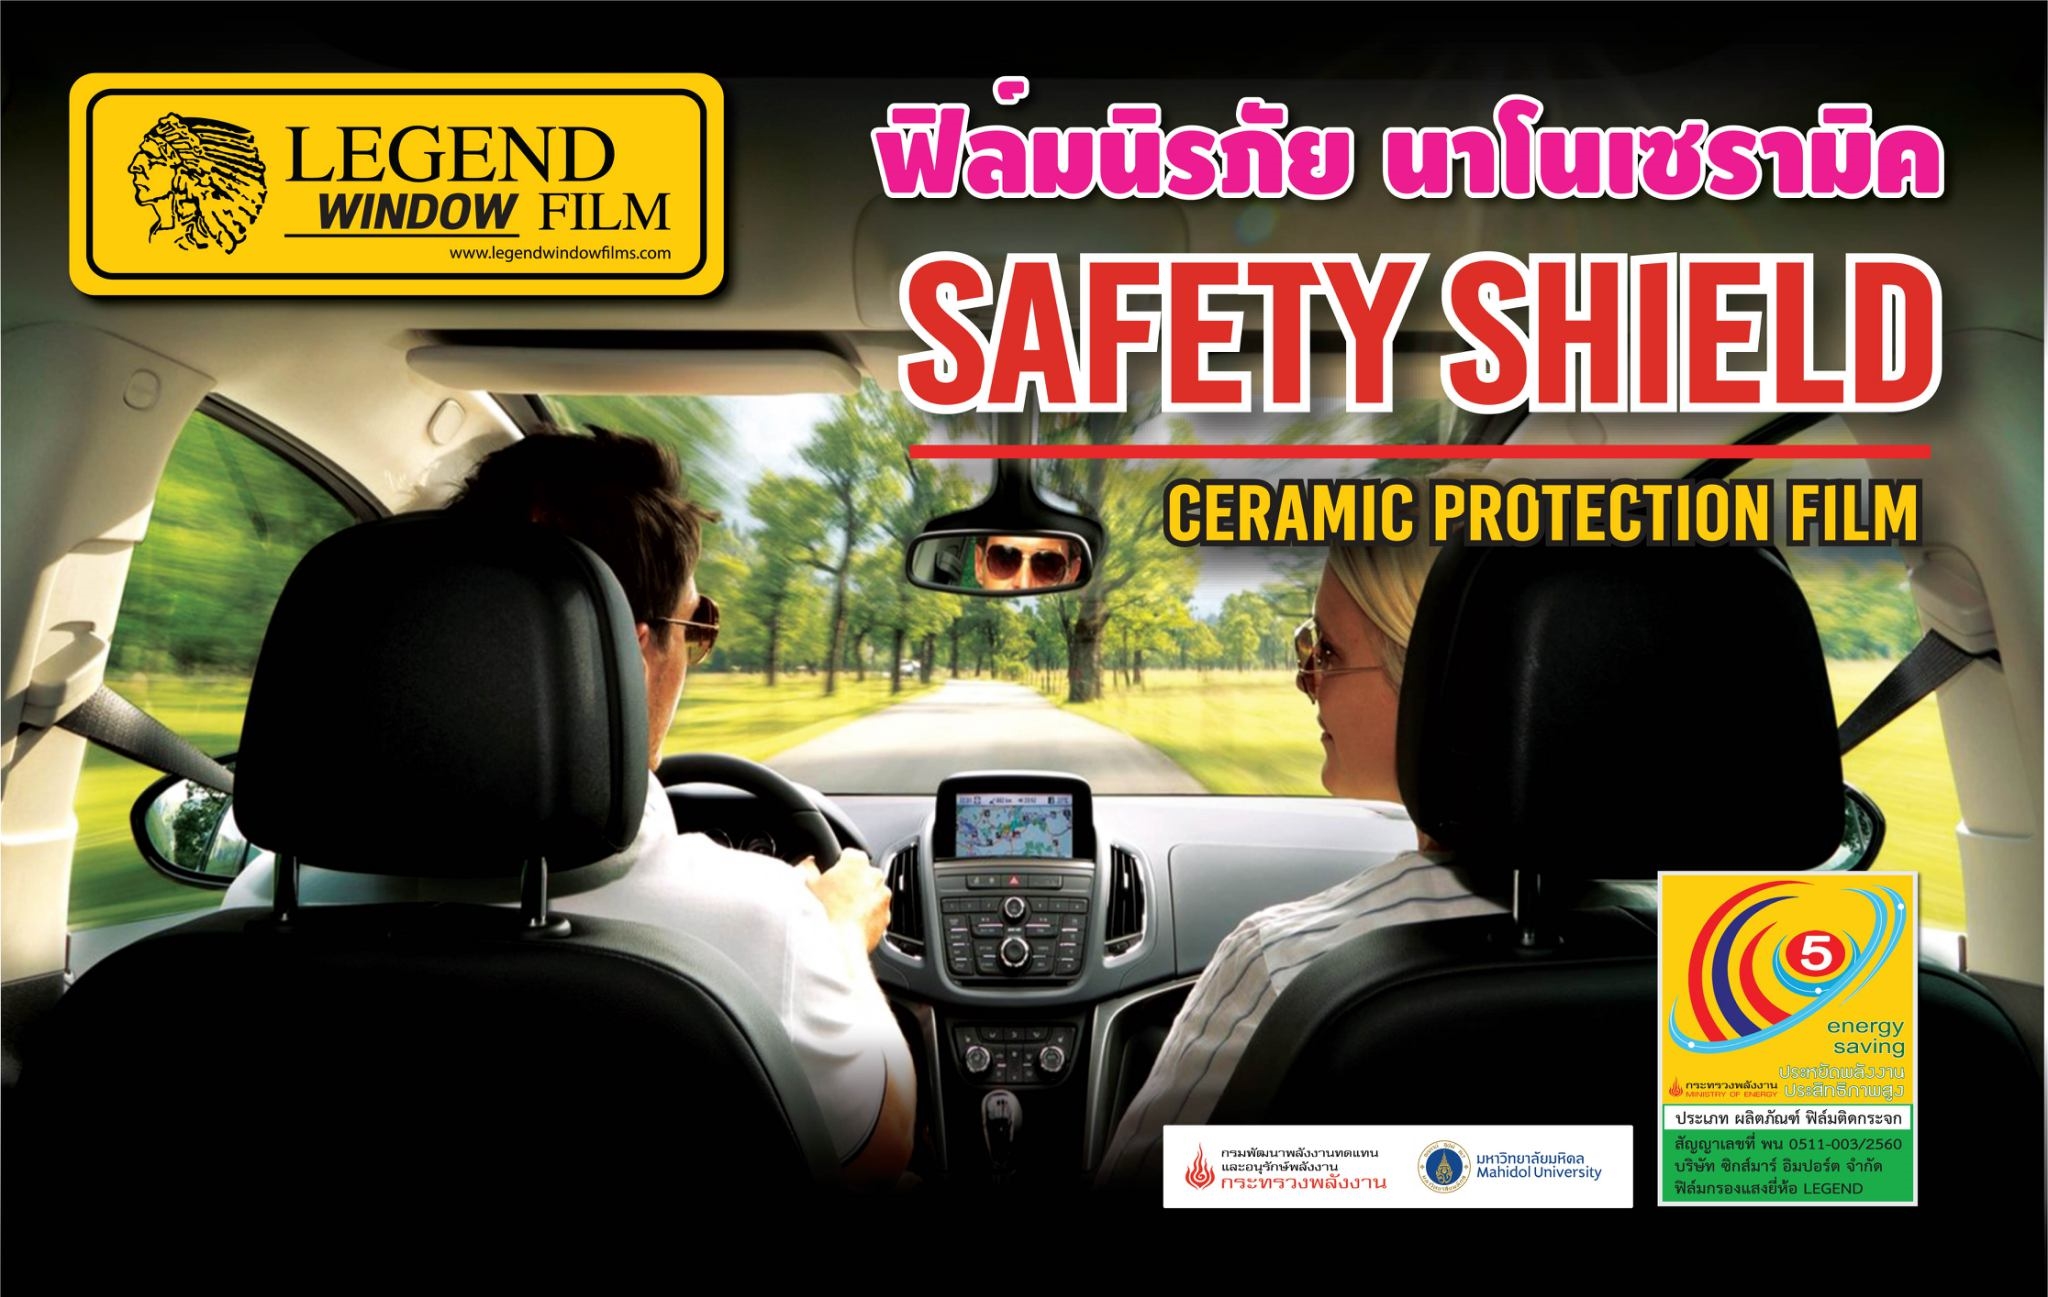 SAFETY SHIELD SERIES